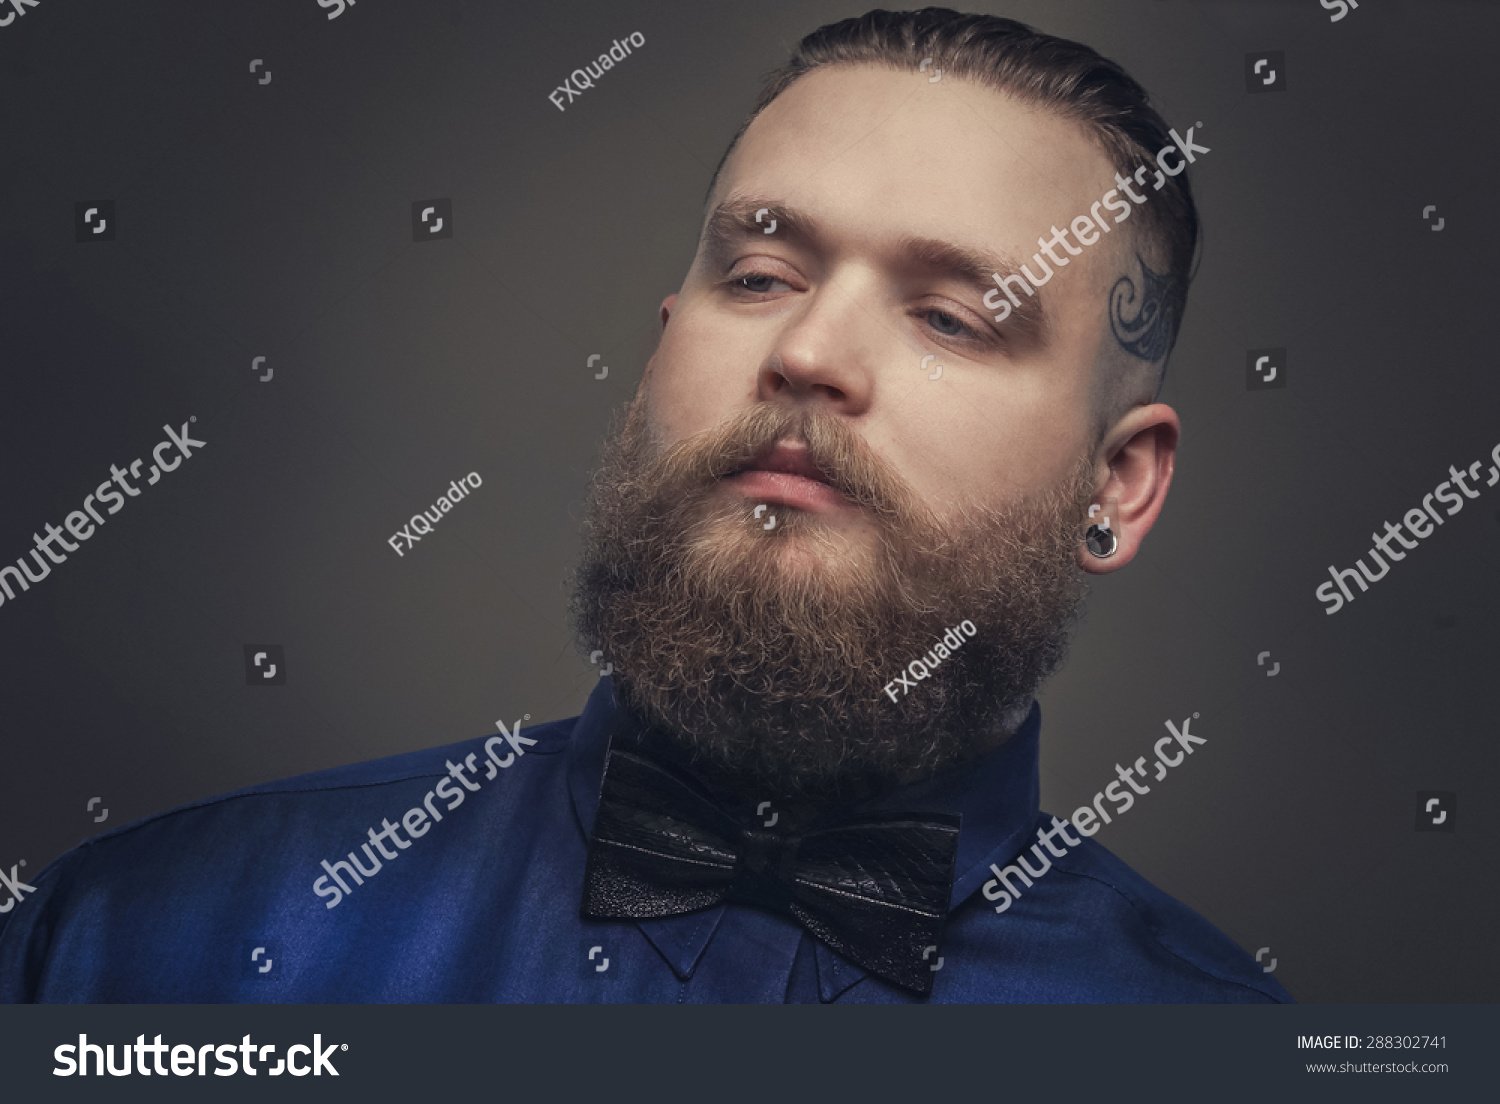 Serious Guy In Blue Shirt And Bow Tie. Isolated On Grey Stock Photo ...